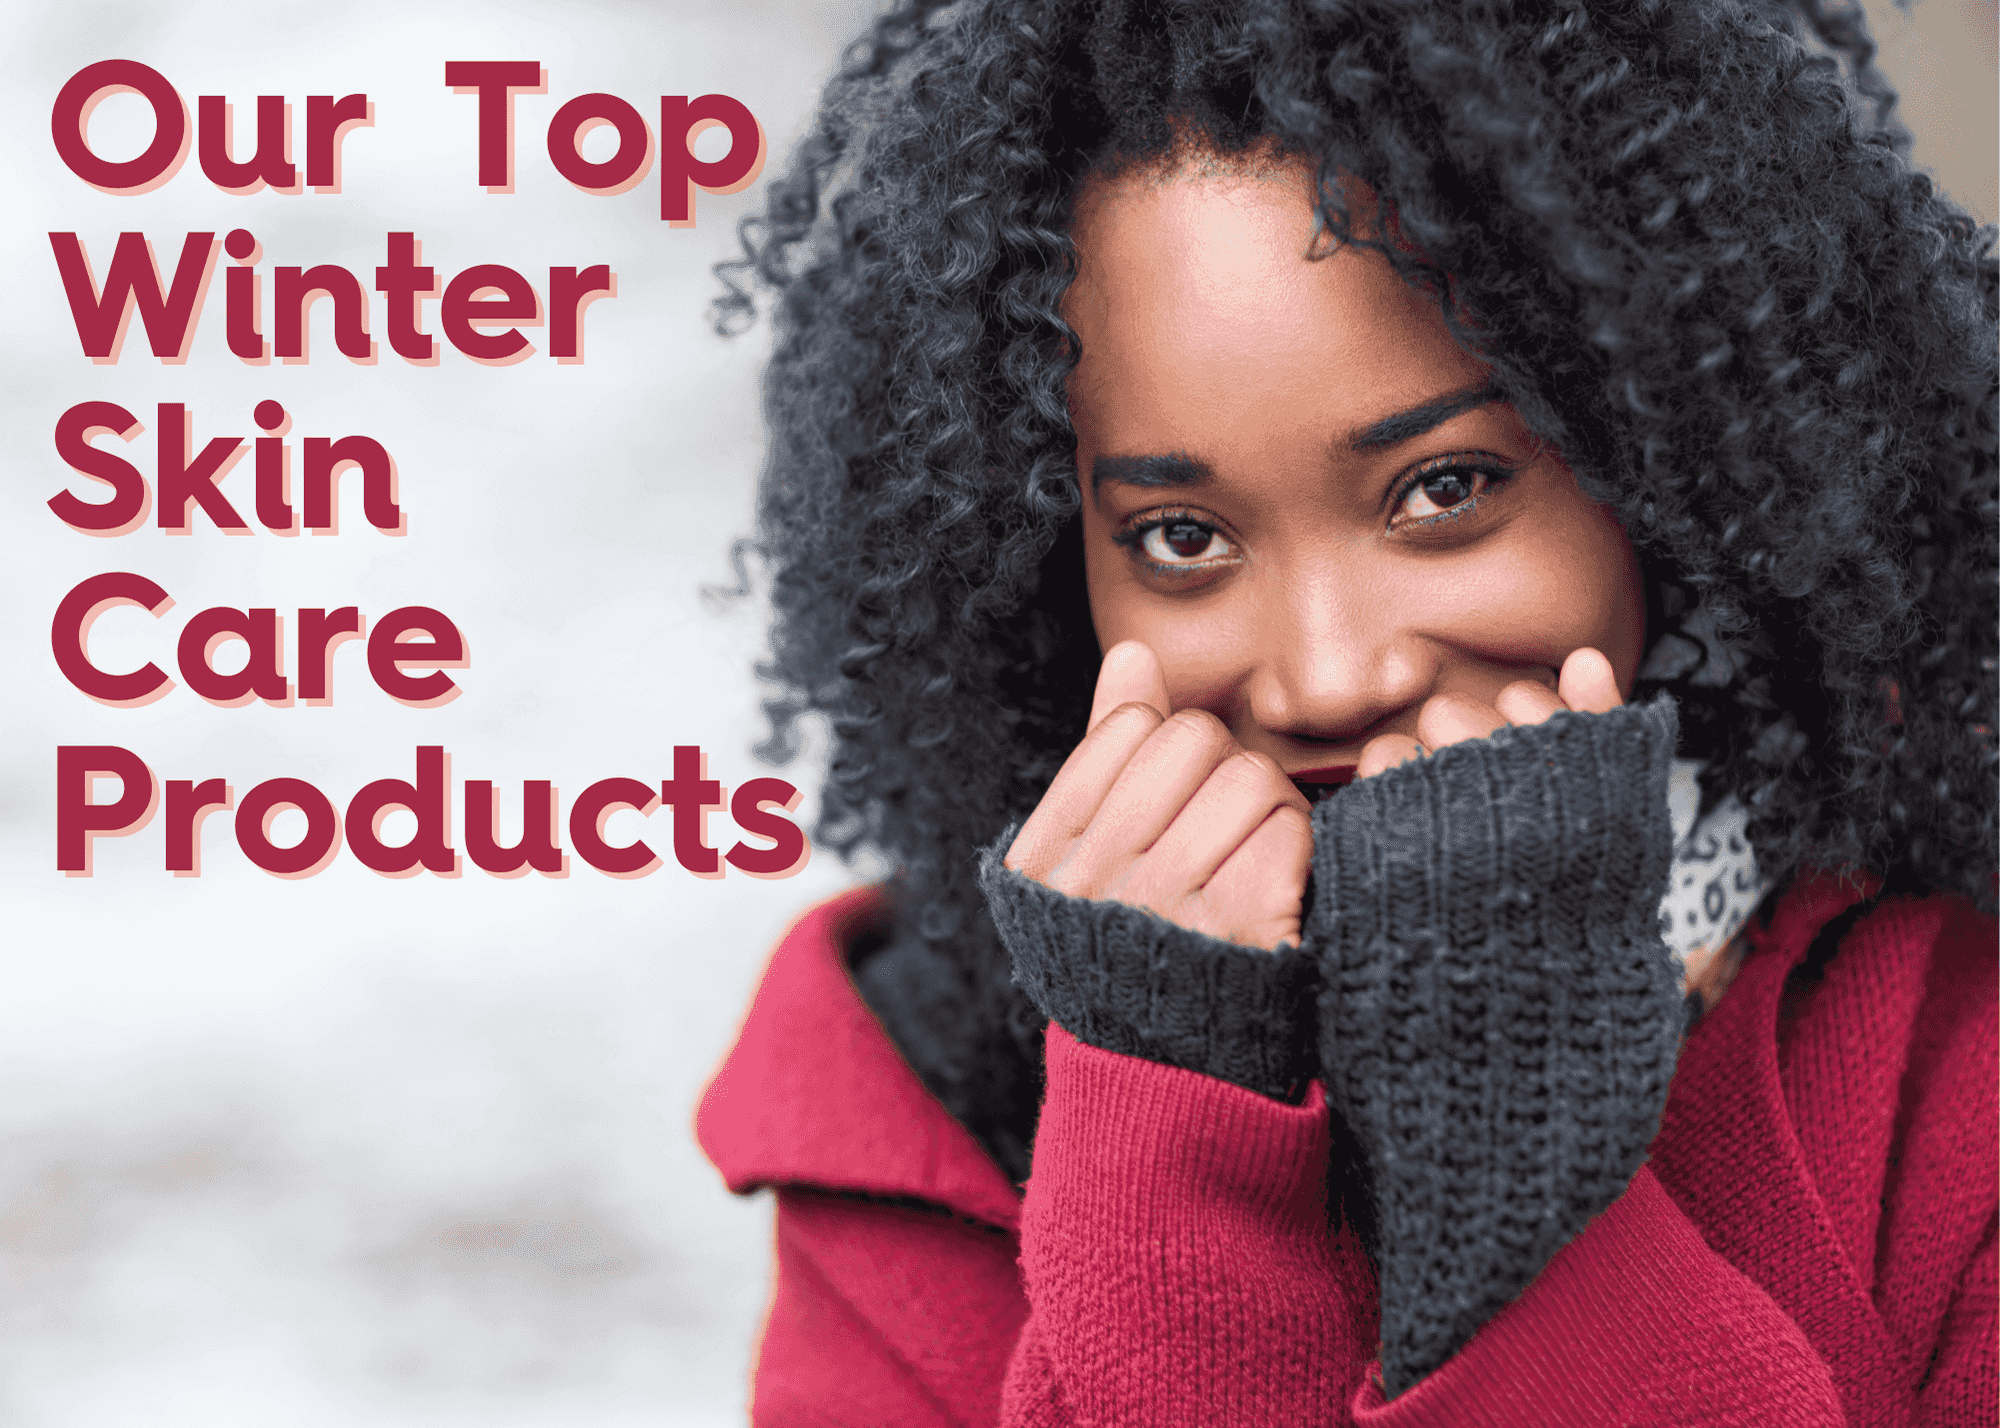 Top winter skin care products - woman outside with red jacket smiling and holding hands up to face